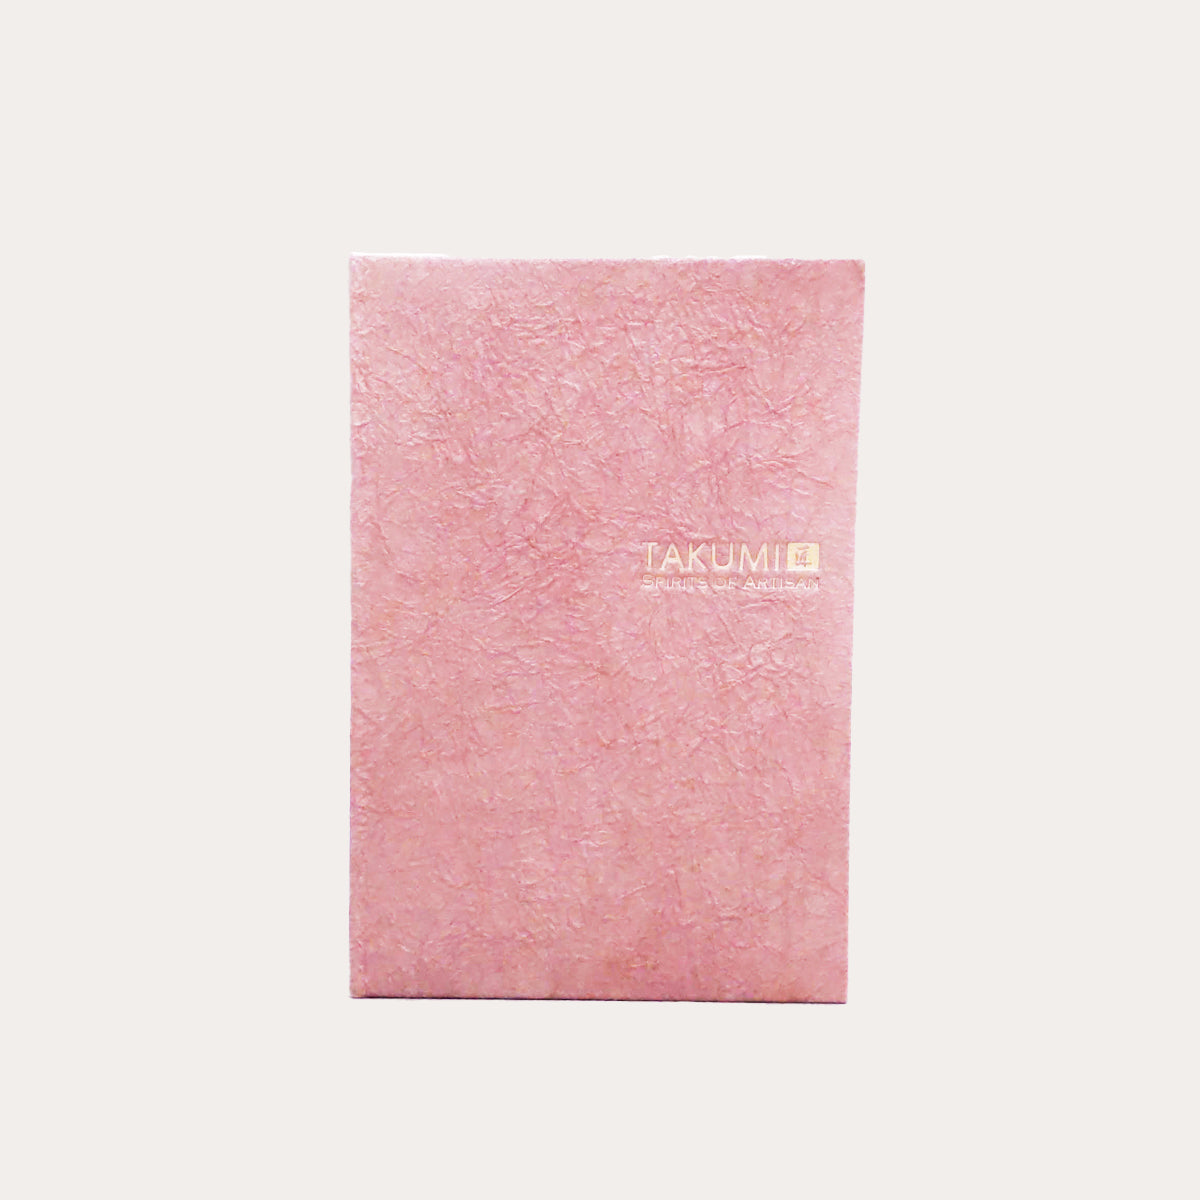 Takumi Washi Paper Notebook - Silver Label Soft Cover Plain / AKA (Red)